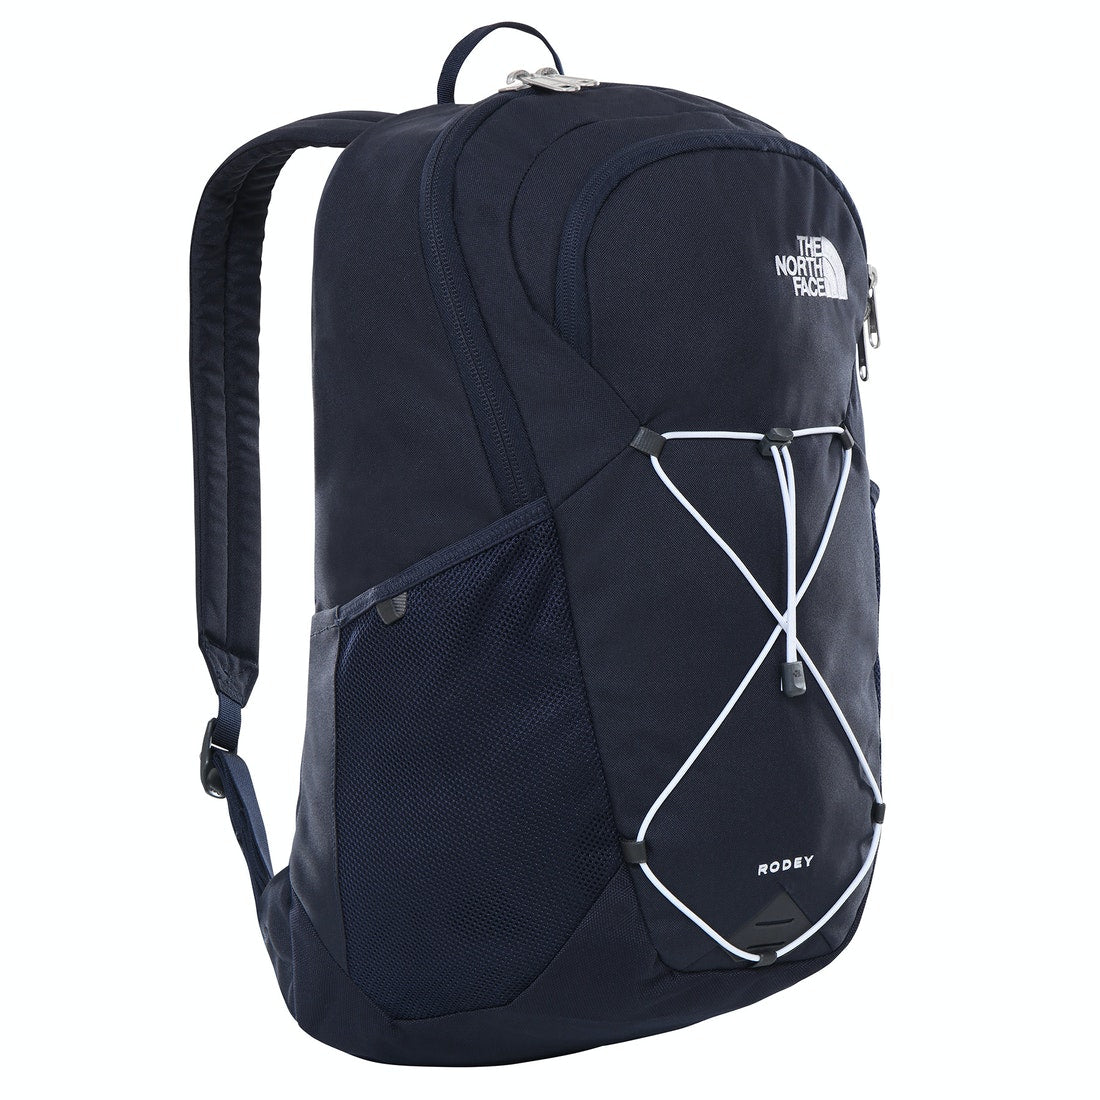 The North Face Rodey Back Pack